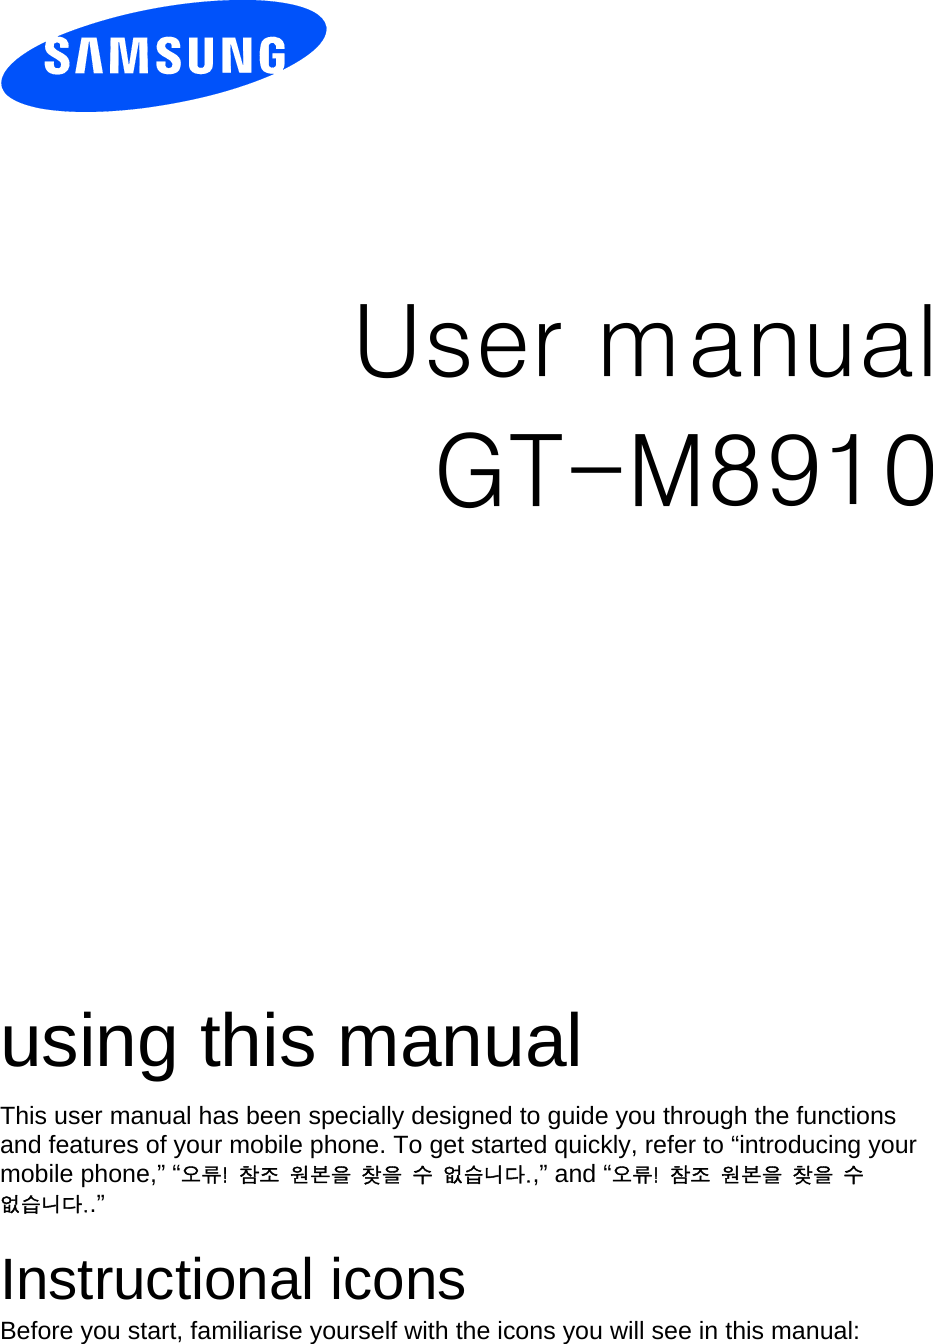          User manual GT-M8910                  using this manual This user manual has been specially designed to guide you through the functions and features of your mobile phone. To get started quickly, refer to “introducing your mobile phone,” “오류!  참조  원본을  찾을  수  없습니다.,” and “오류!  참조  원본을  찾을  수 없습니다..”  Instructional icons Before you start, familiarise yourself with the icons you will see in this manual:   